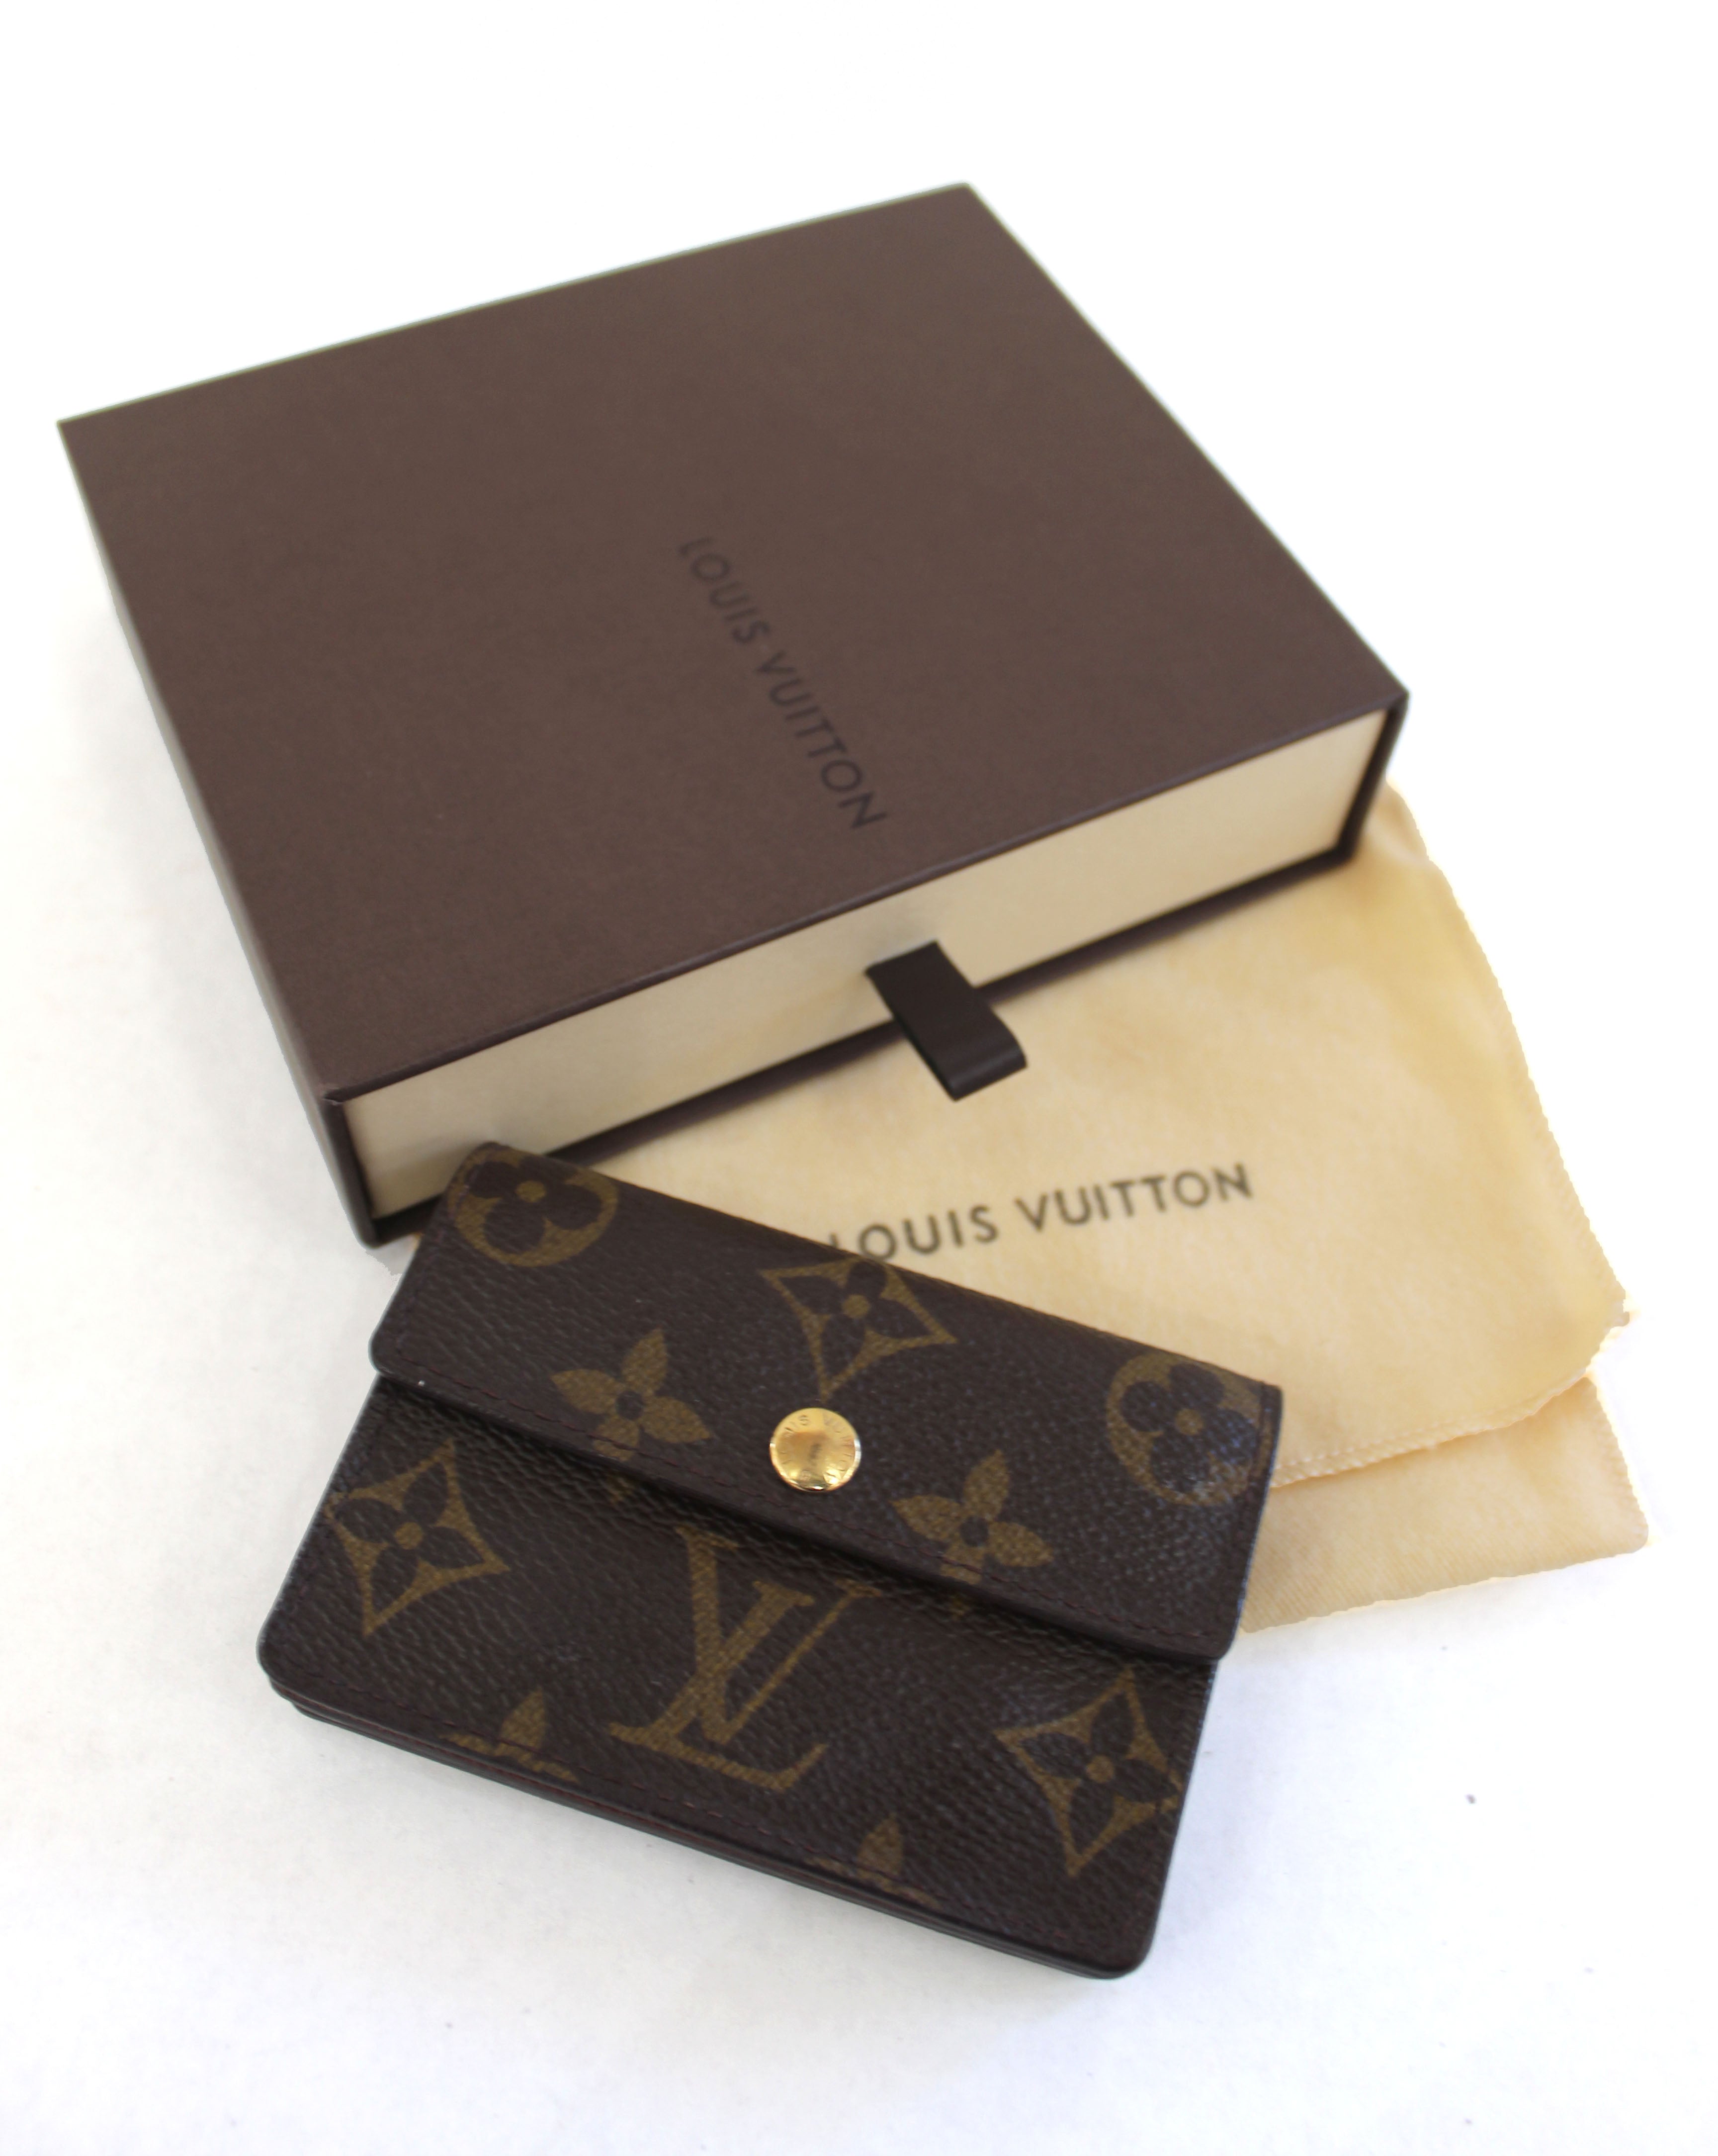 Authentic Louis Vuitton Monogram Canvas Small Card Holder Coin Wallet